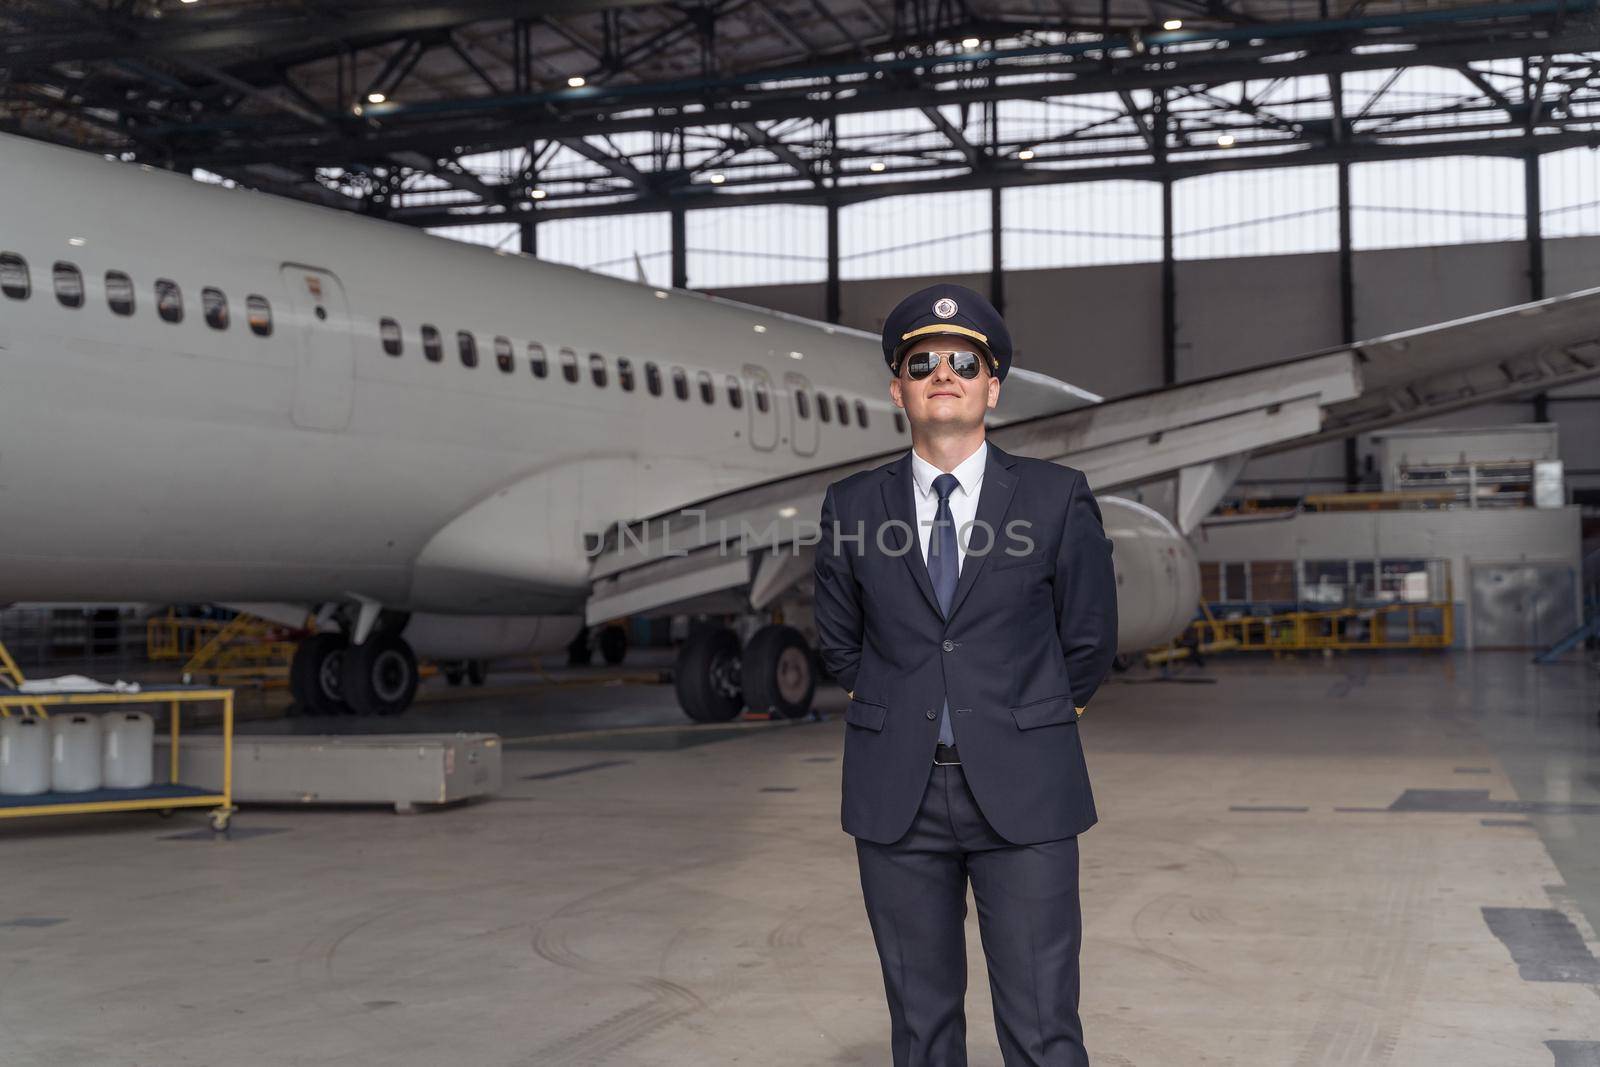 Pilot wearing sunglasses ready for flight while standing in front of big passenger airplane in airport